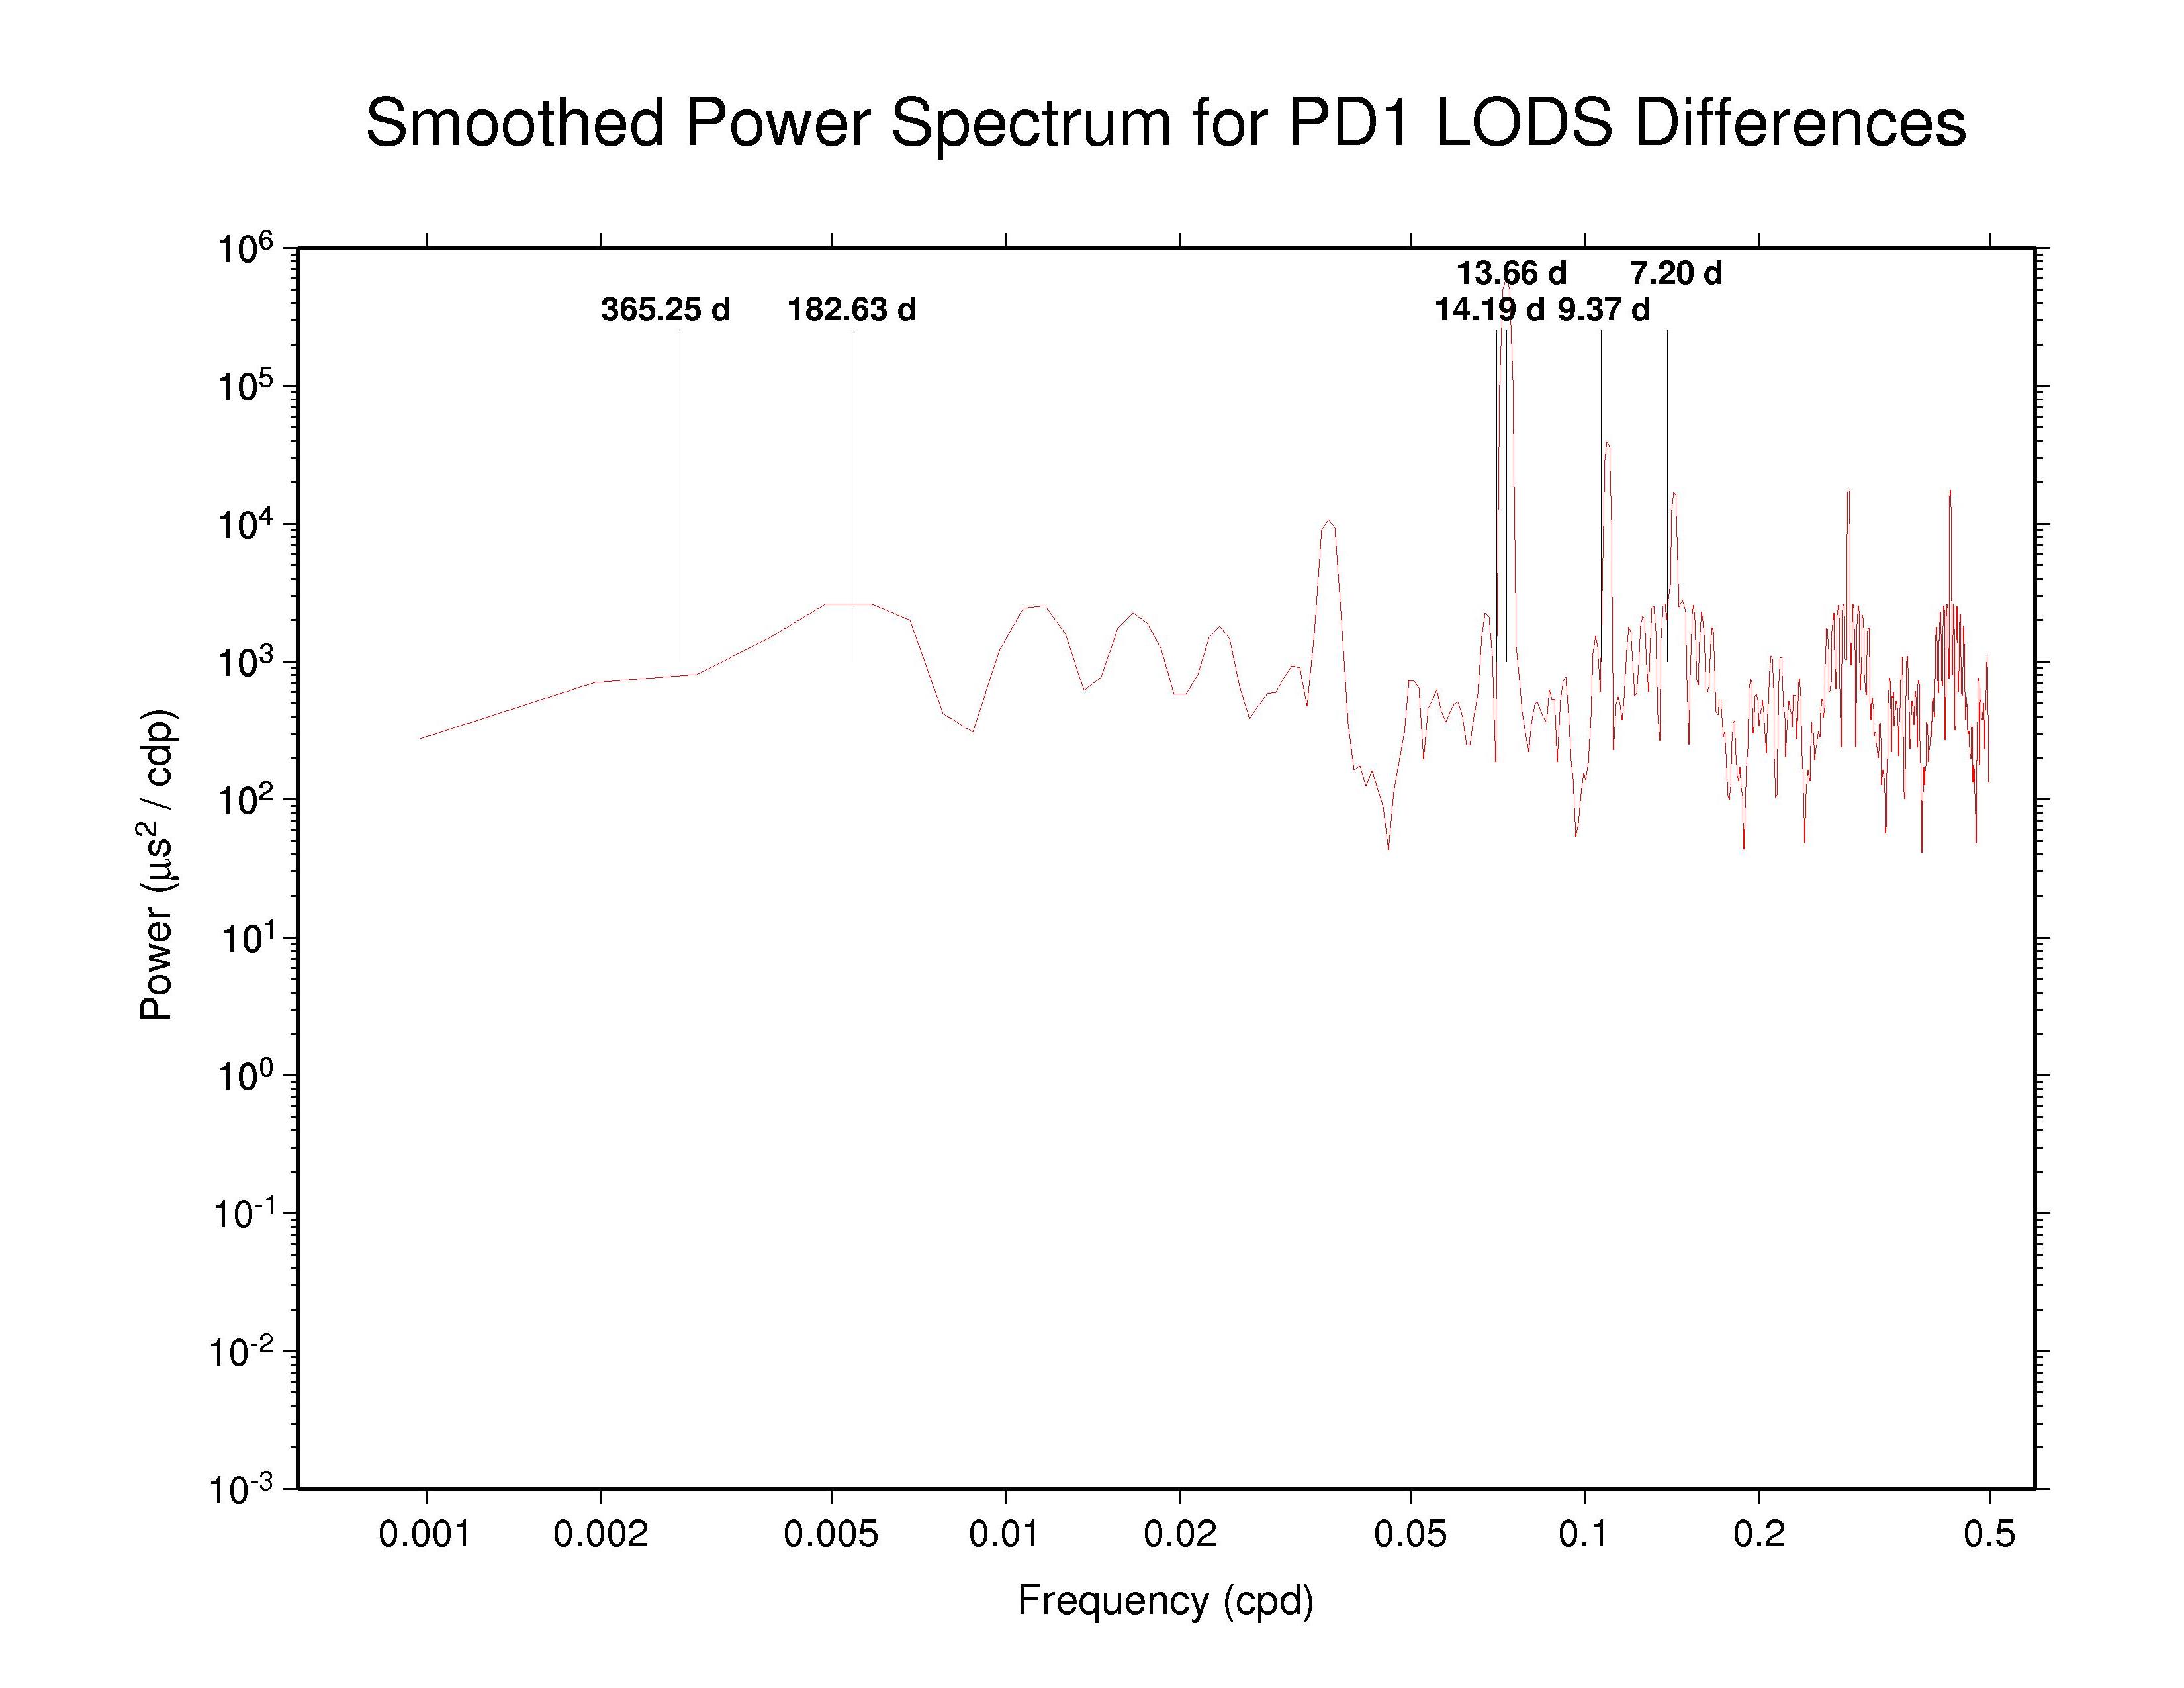 PDR LOD discontinuities